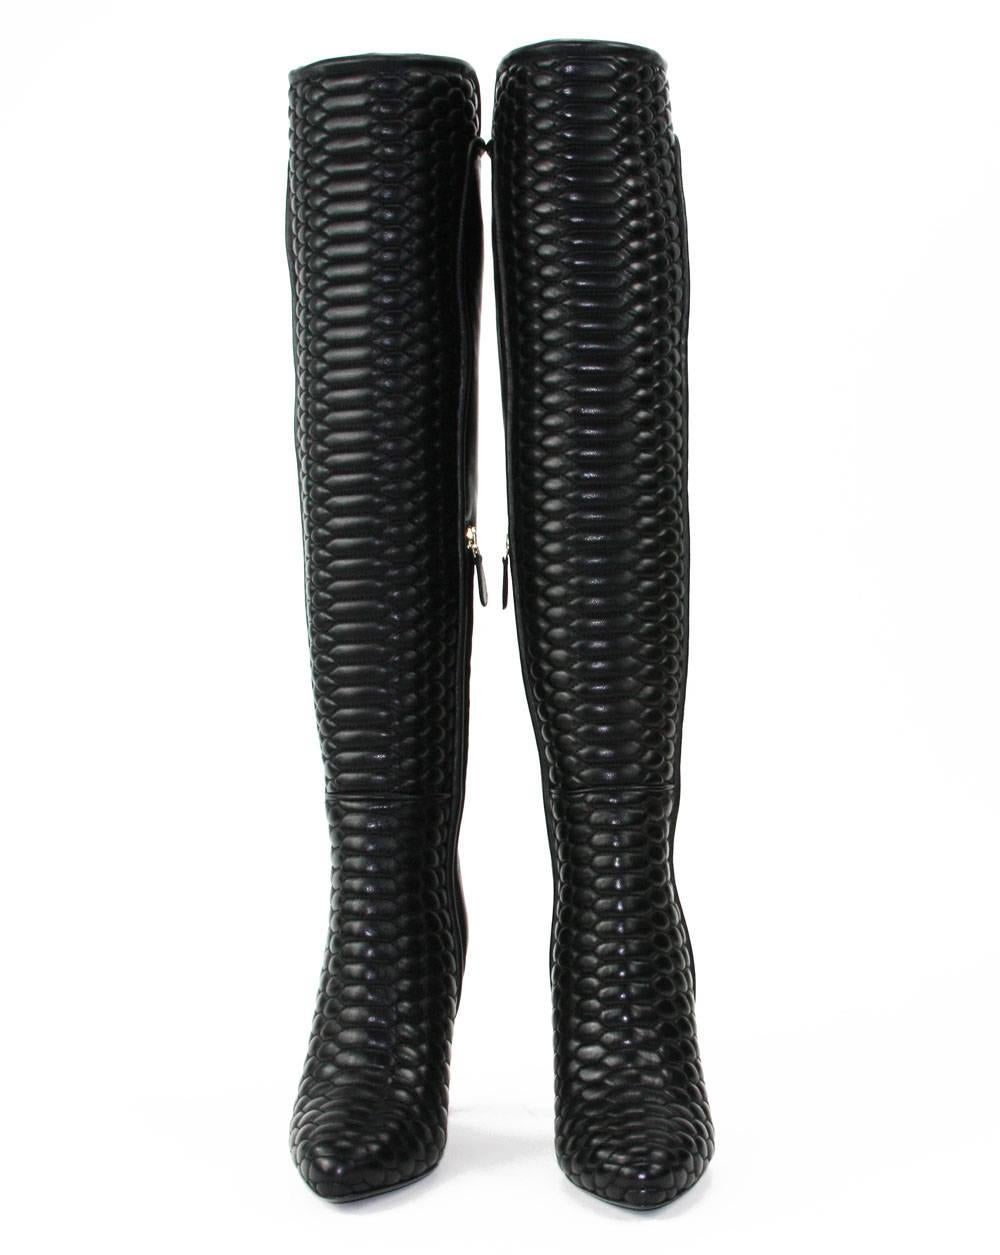 New Roberto Cavalli Textured Black Leather Over the Knee Boots It. 37 ...